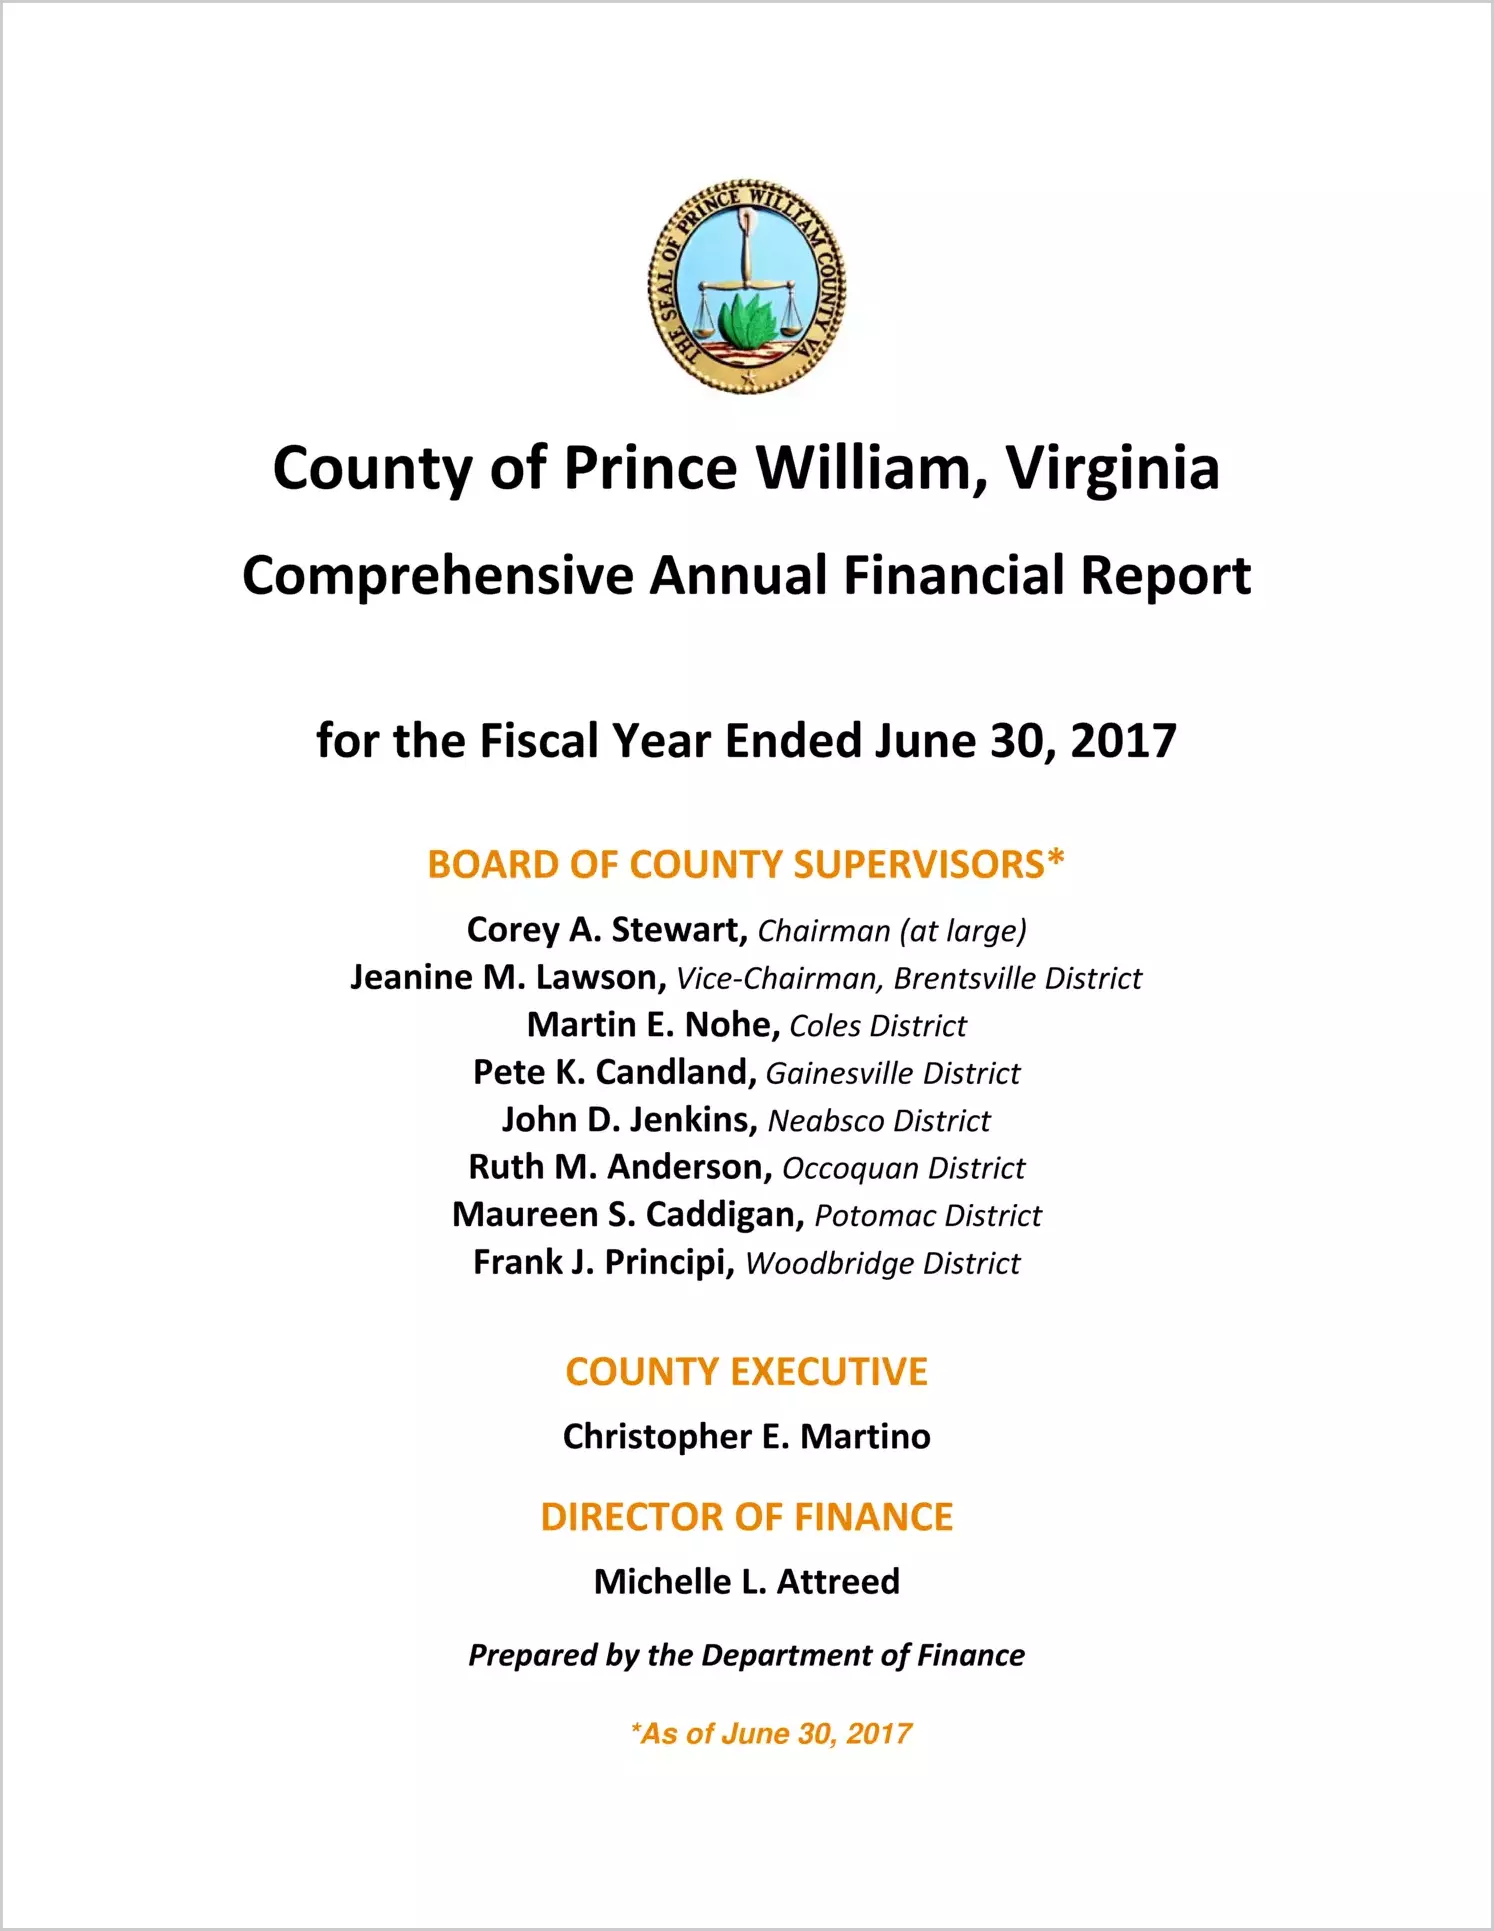 2017 Annual Financial Report for County of Prince William